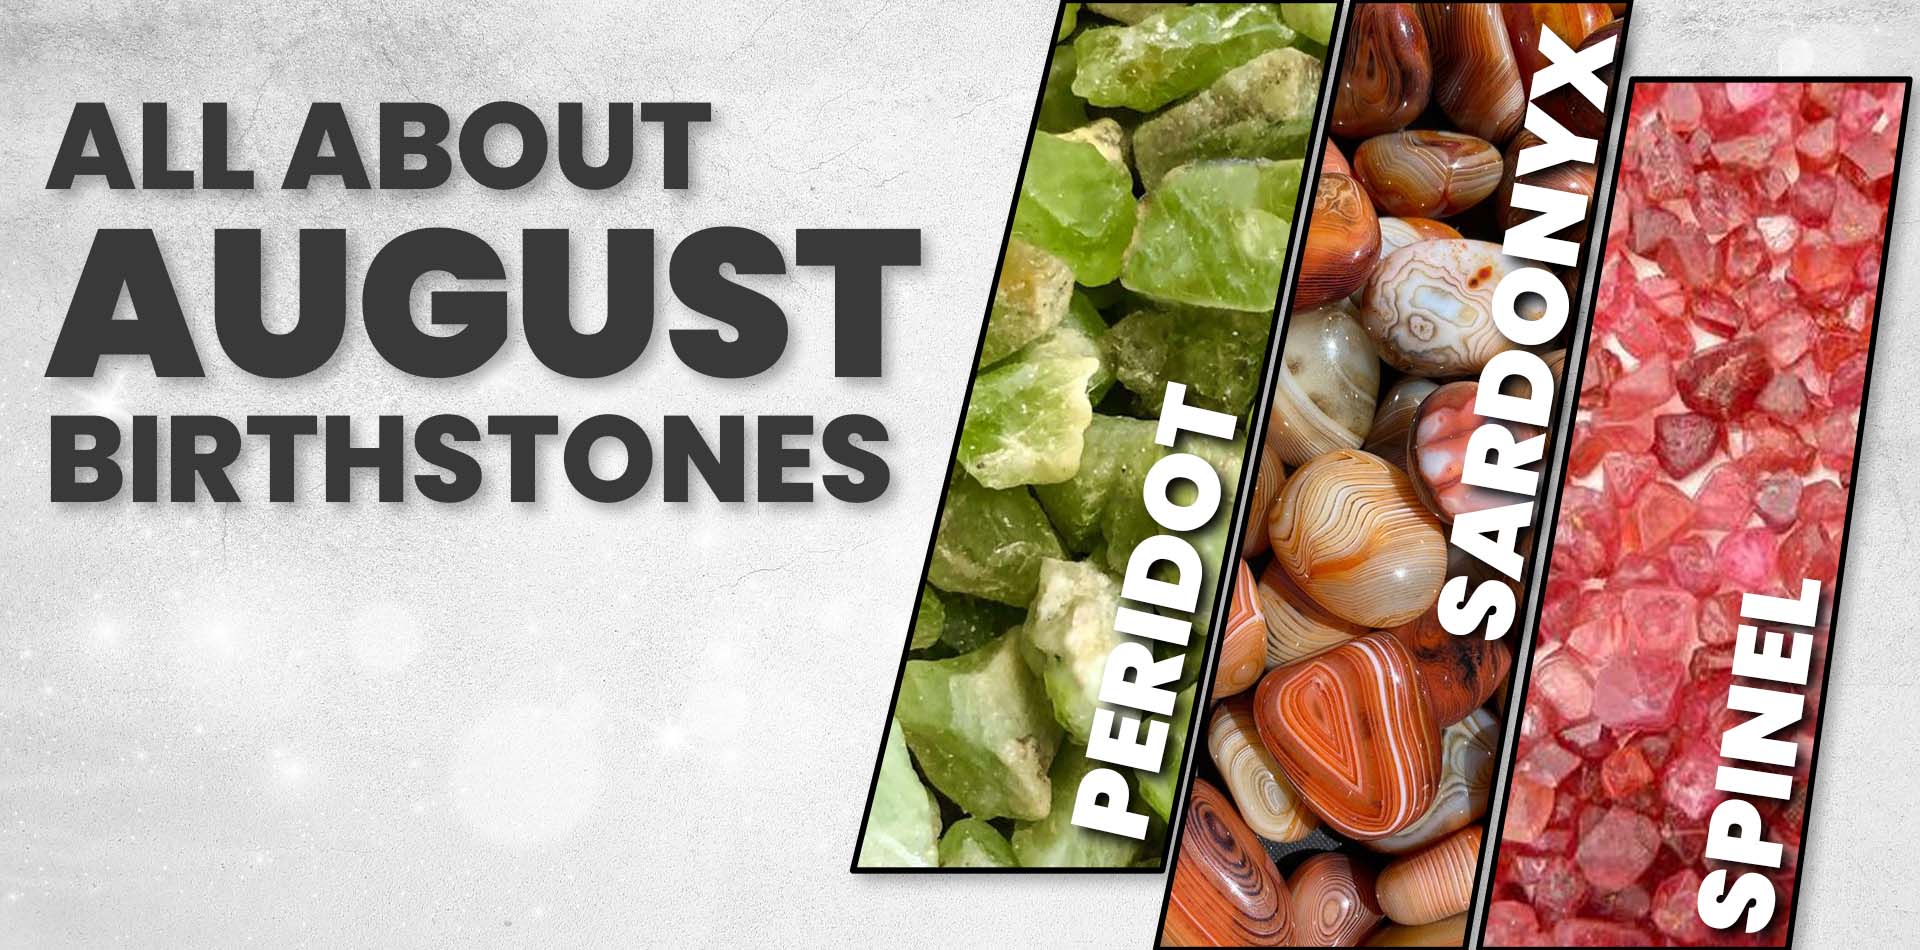 All About August Birthstones: Peridot, Sardonyx, and Spinel Insights